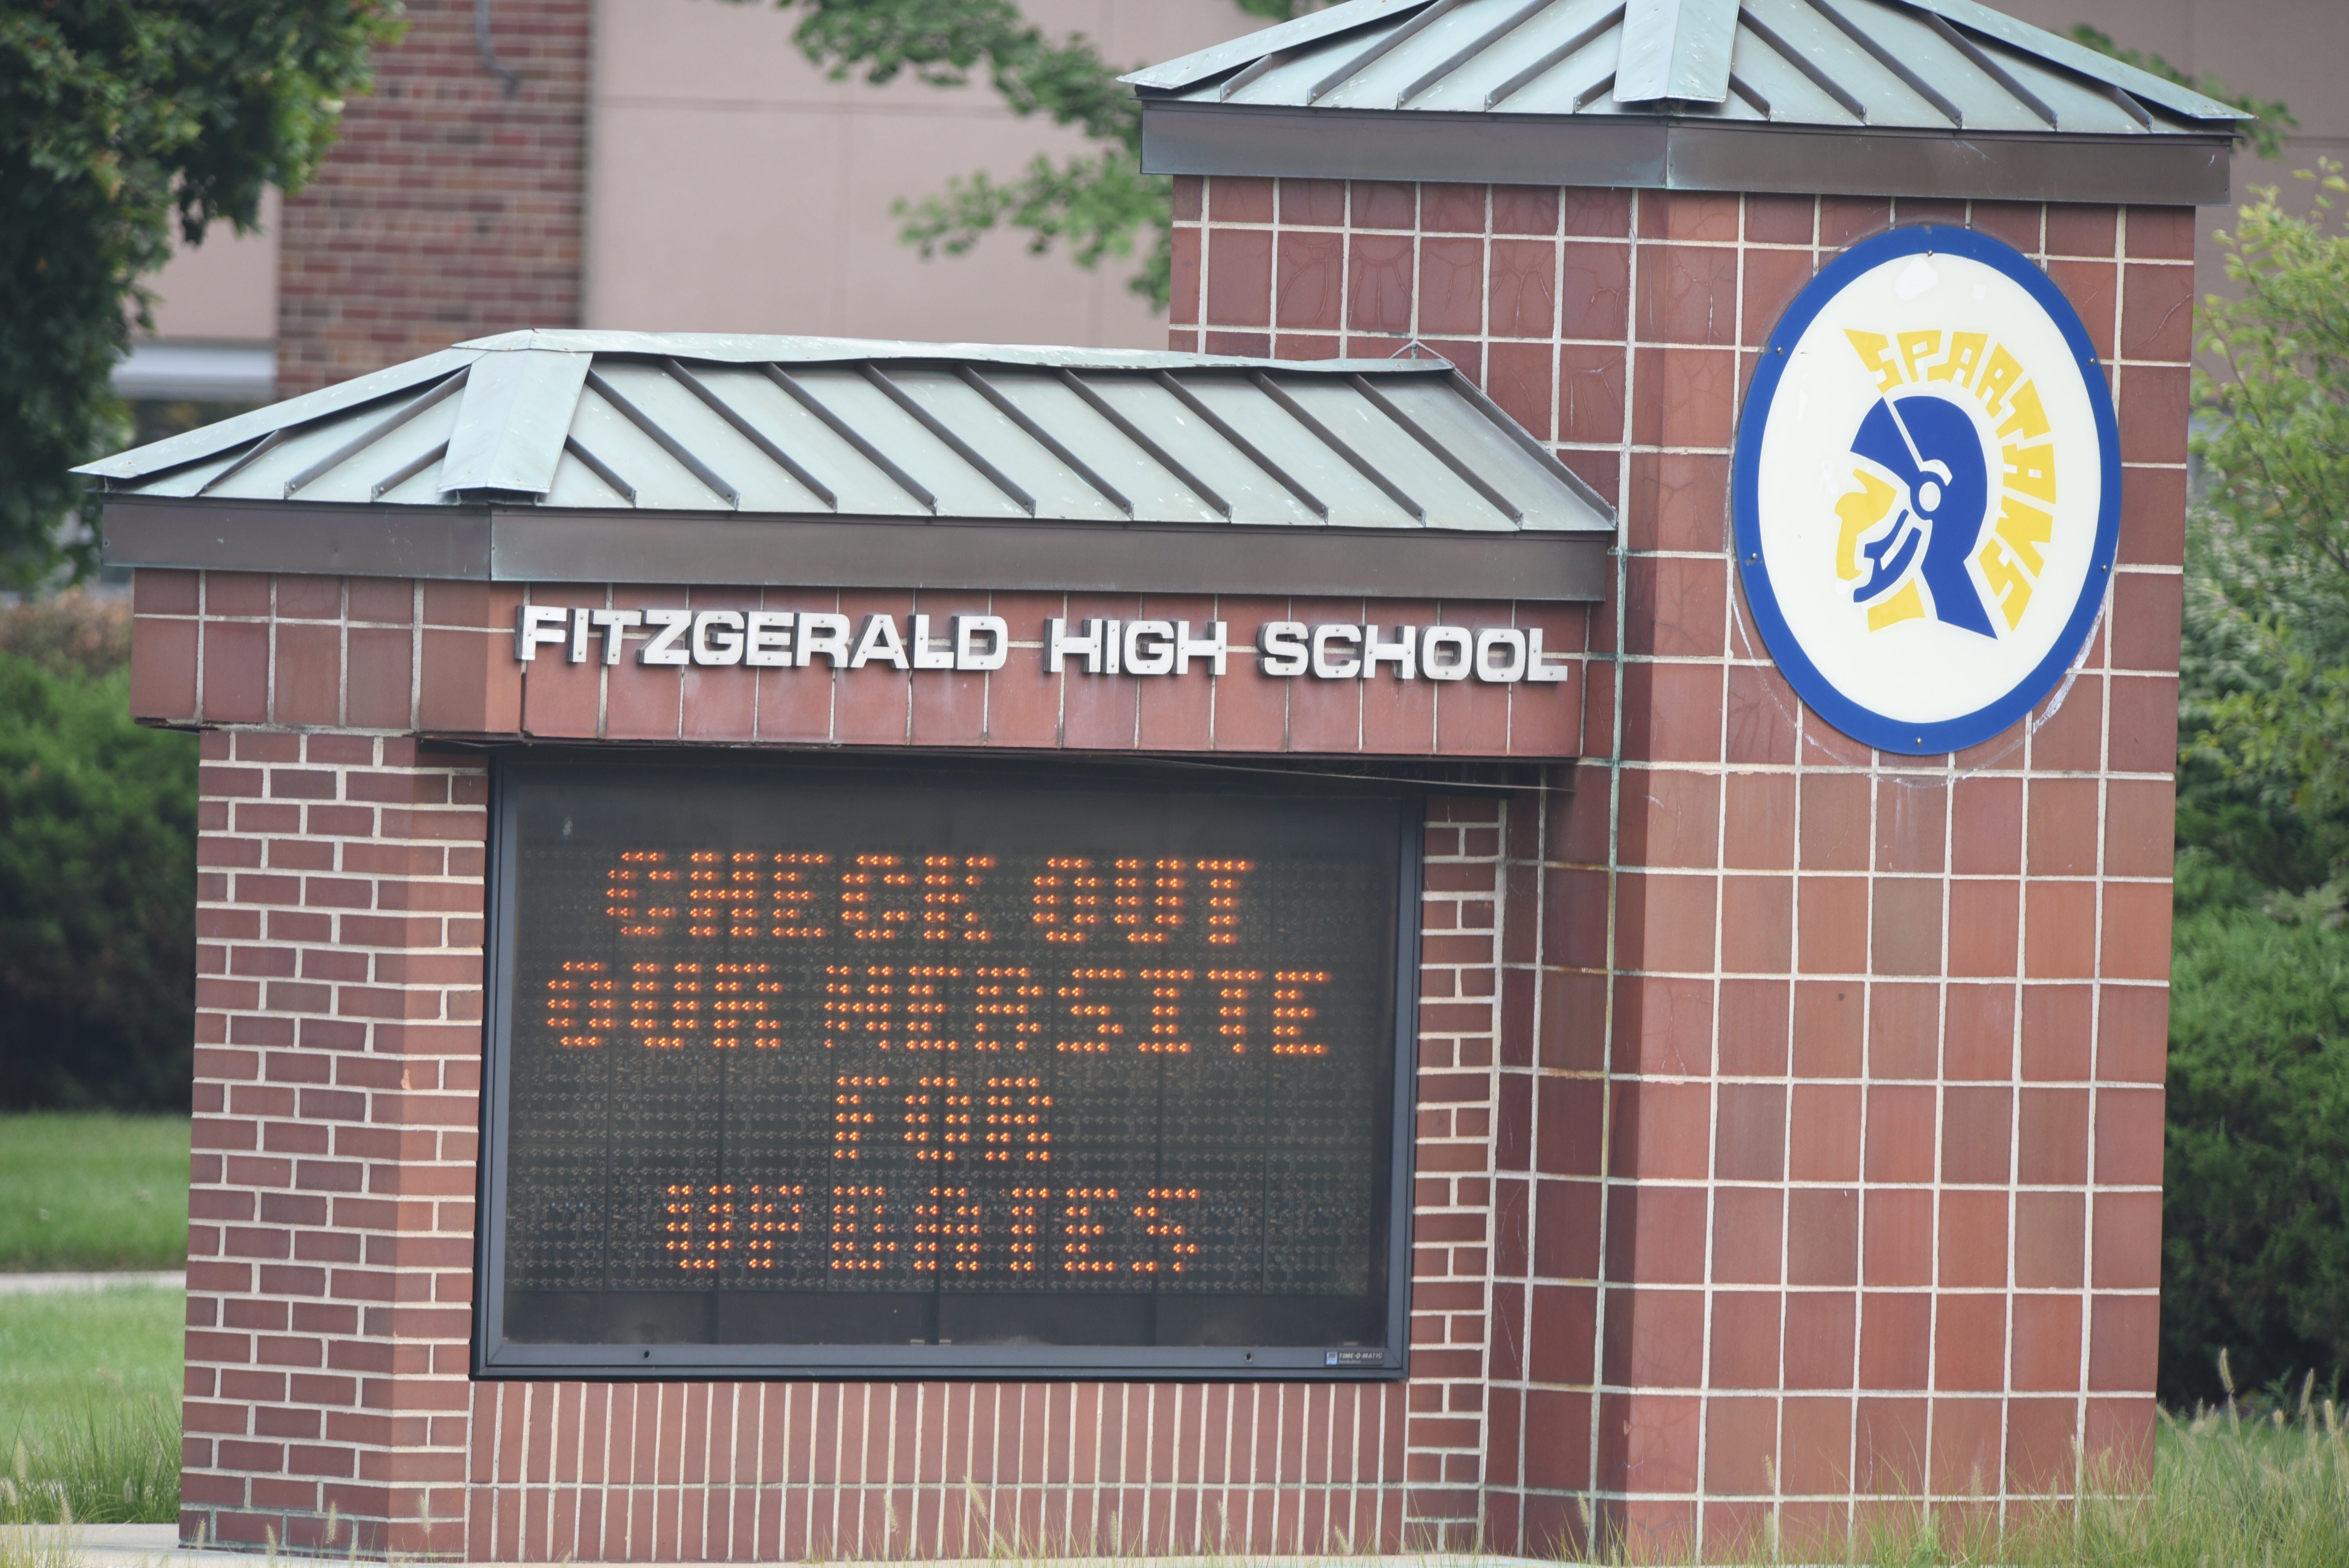 The entry sign at Warren Fitzgerald High School refers passersby to its website for updates.